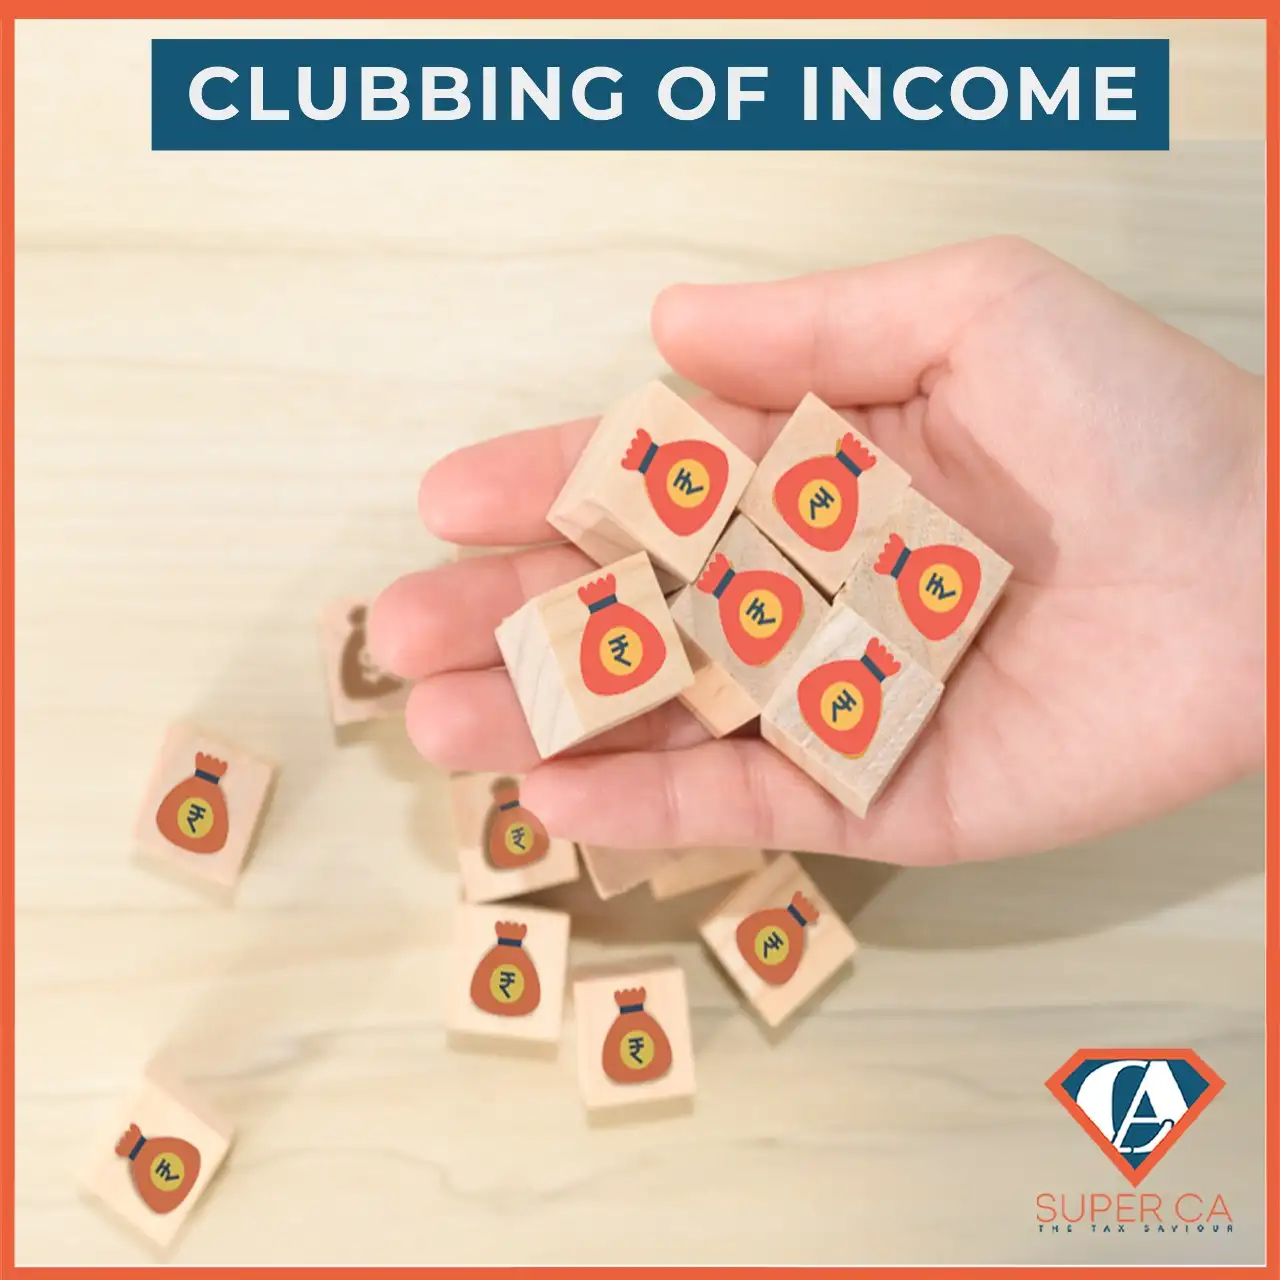 Clubbing of Income under section 60-64